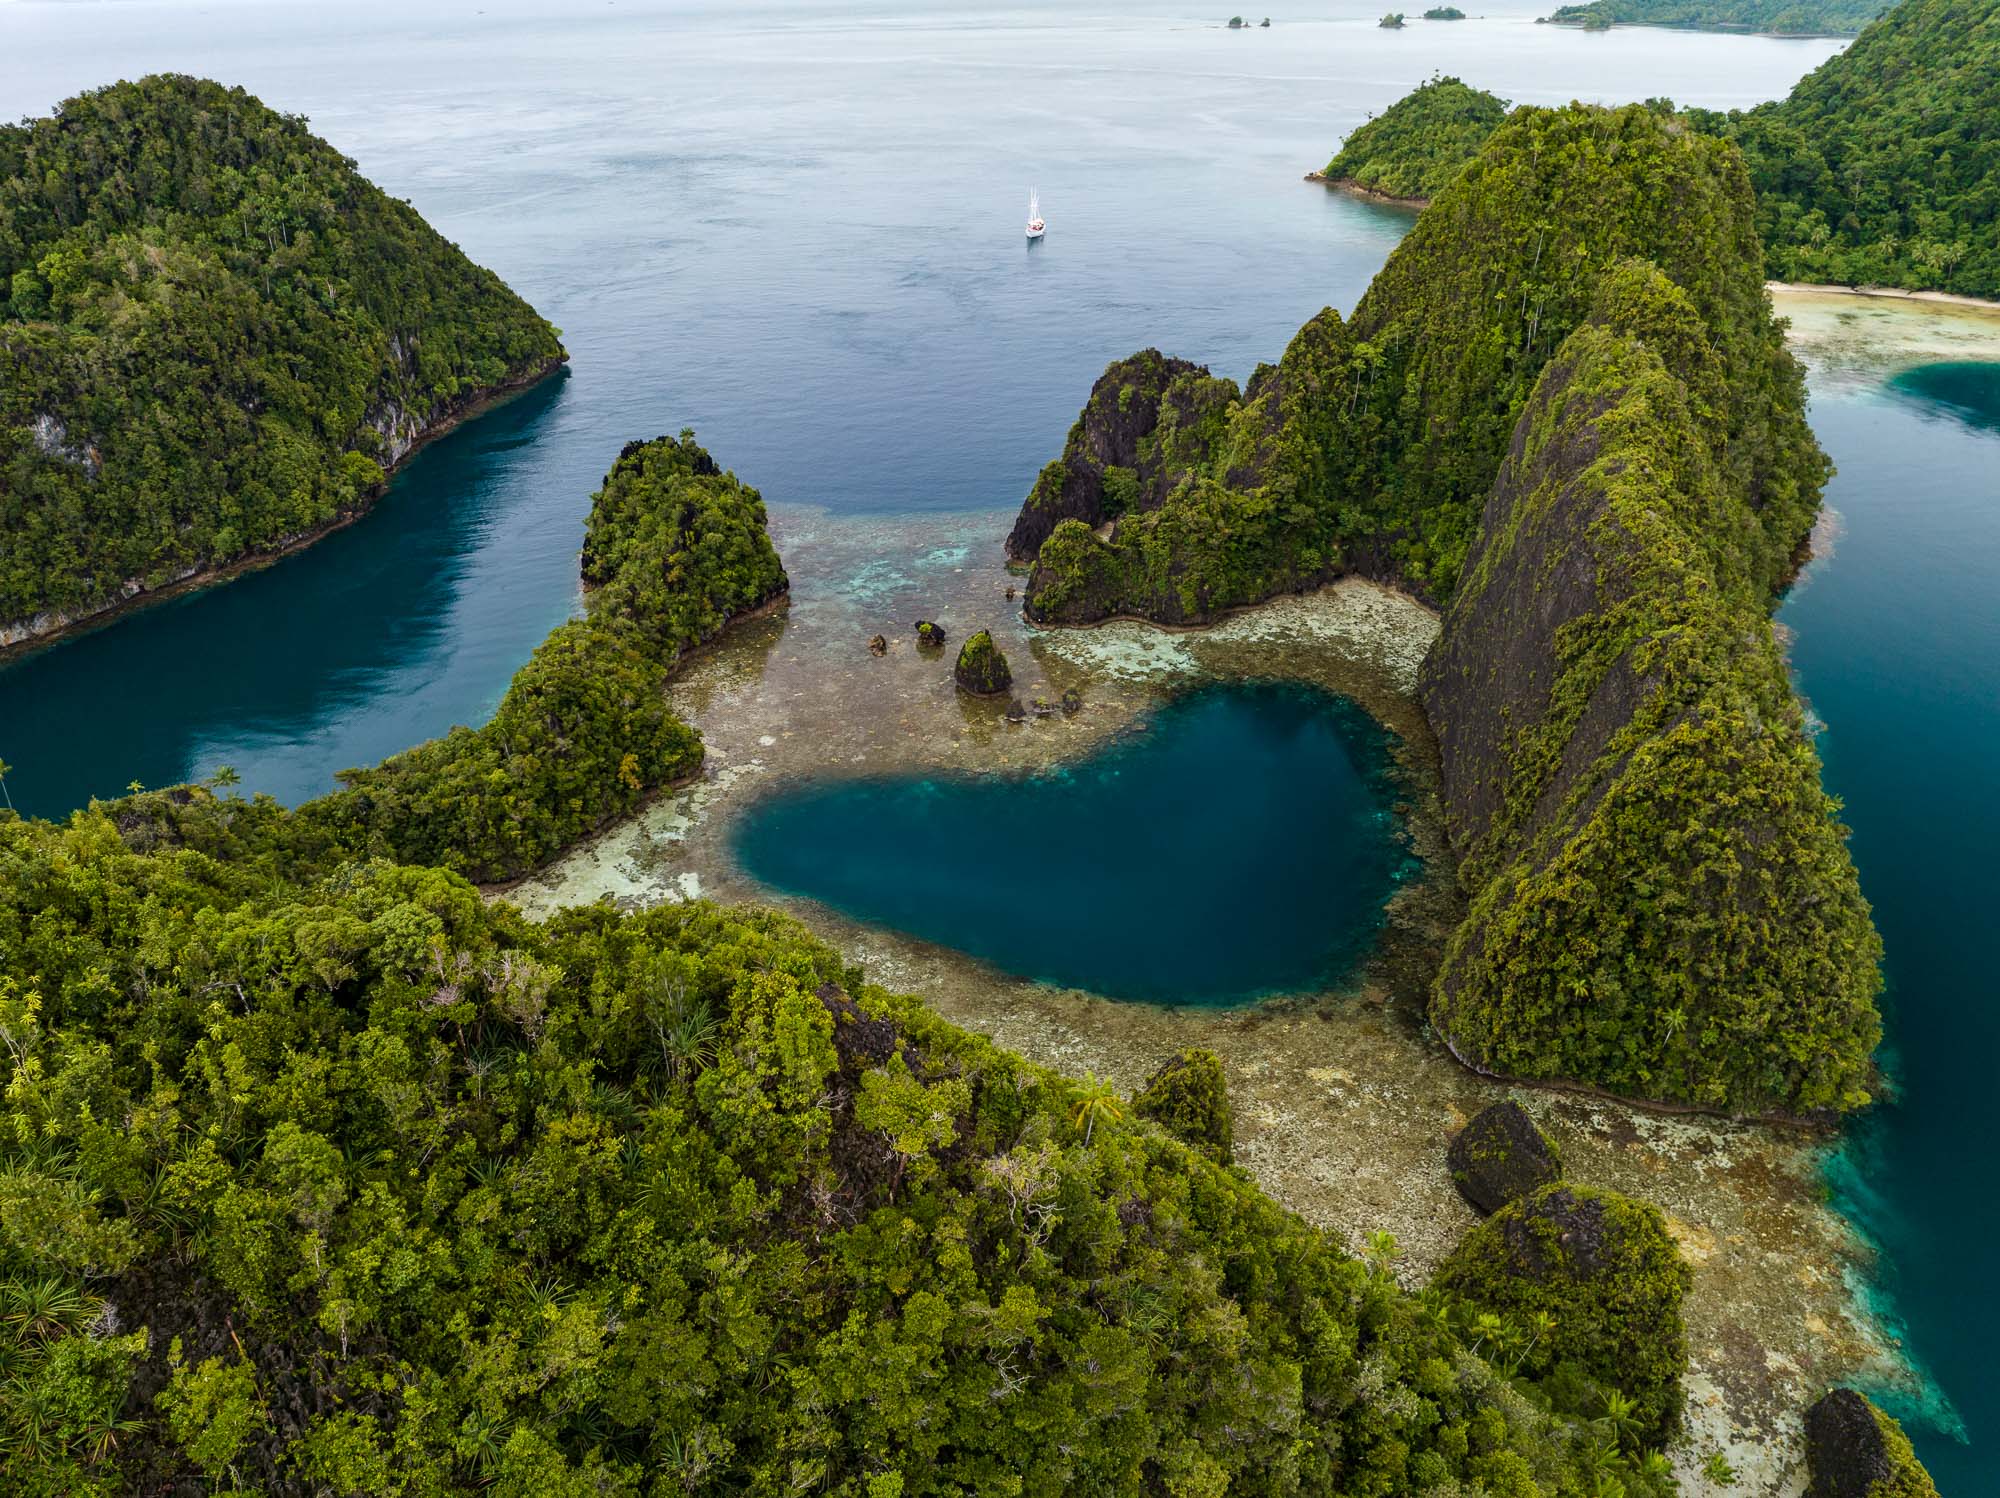 Immerse yourself throughout the Raja Ampat archipelago on the Jakare liveaboard.